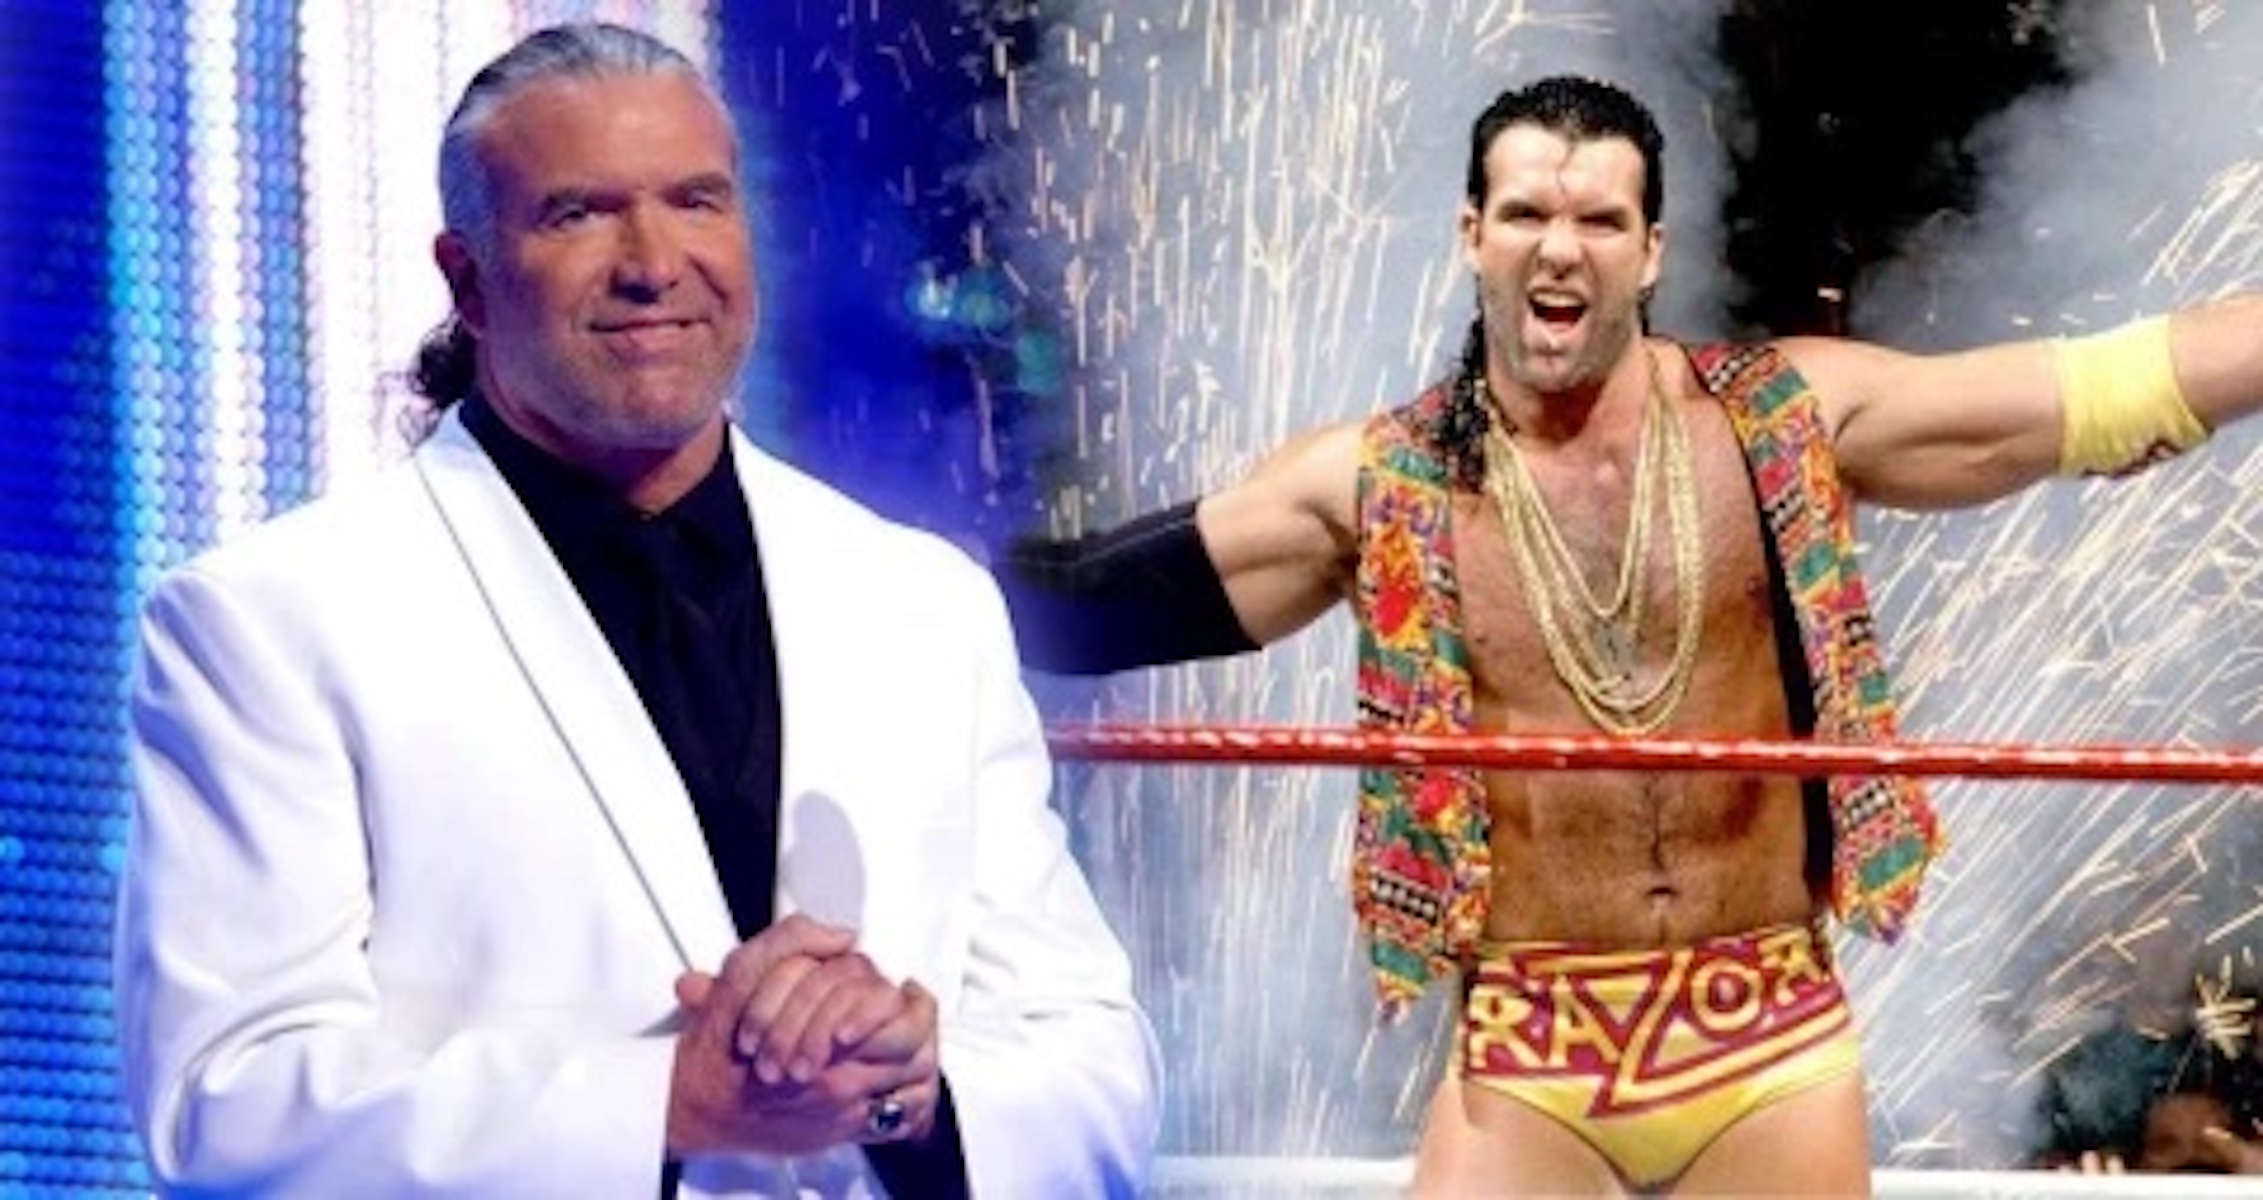 WWE Legend Scott Hall’s Family To Discontinue Life Support